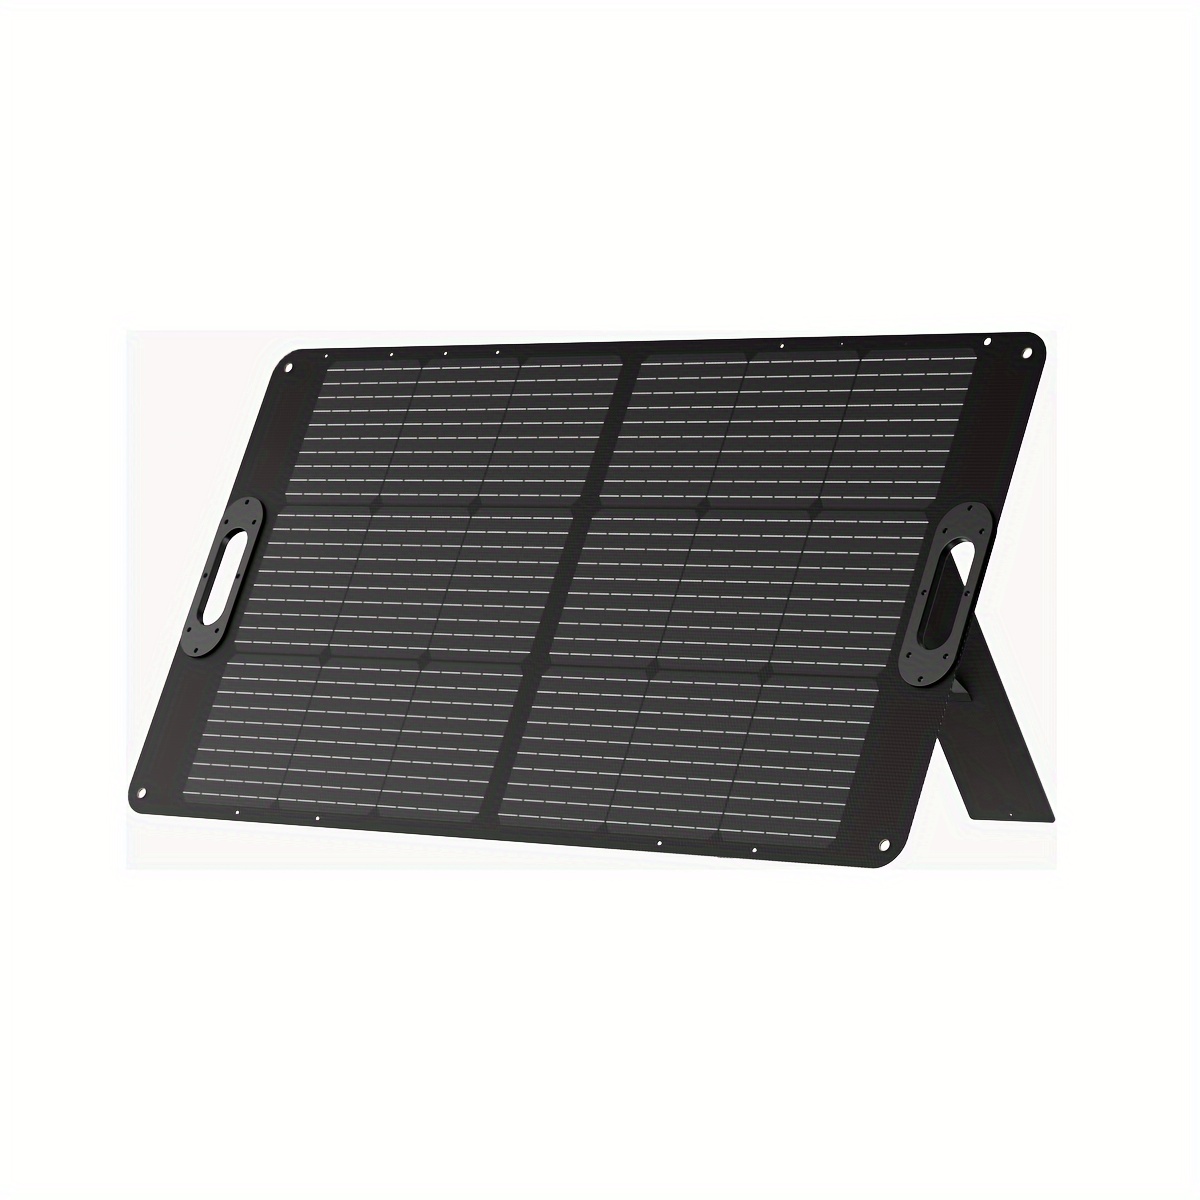 

1pc Oupes 100w Solar Panel Solar Generator, Portable Foldable Power Station For Outdoor Camping Van Rv Trailer, Emergency Power